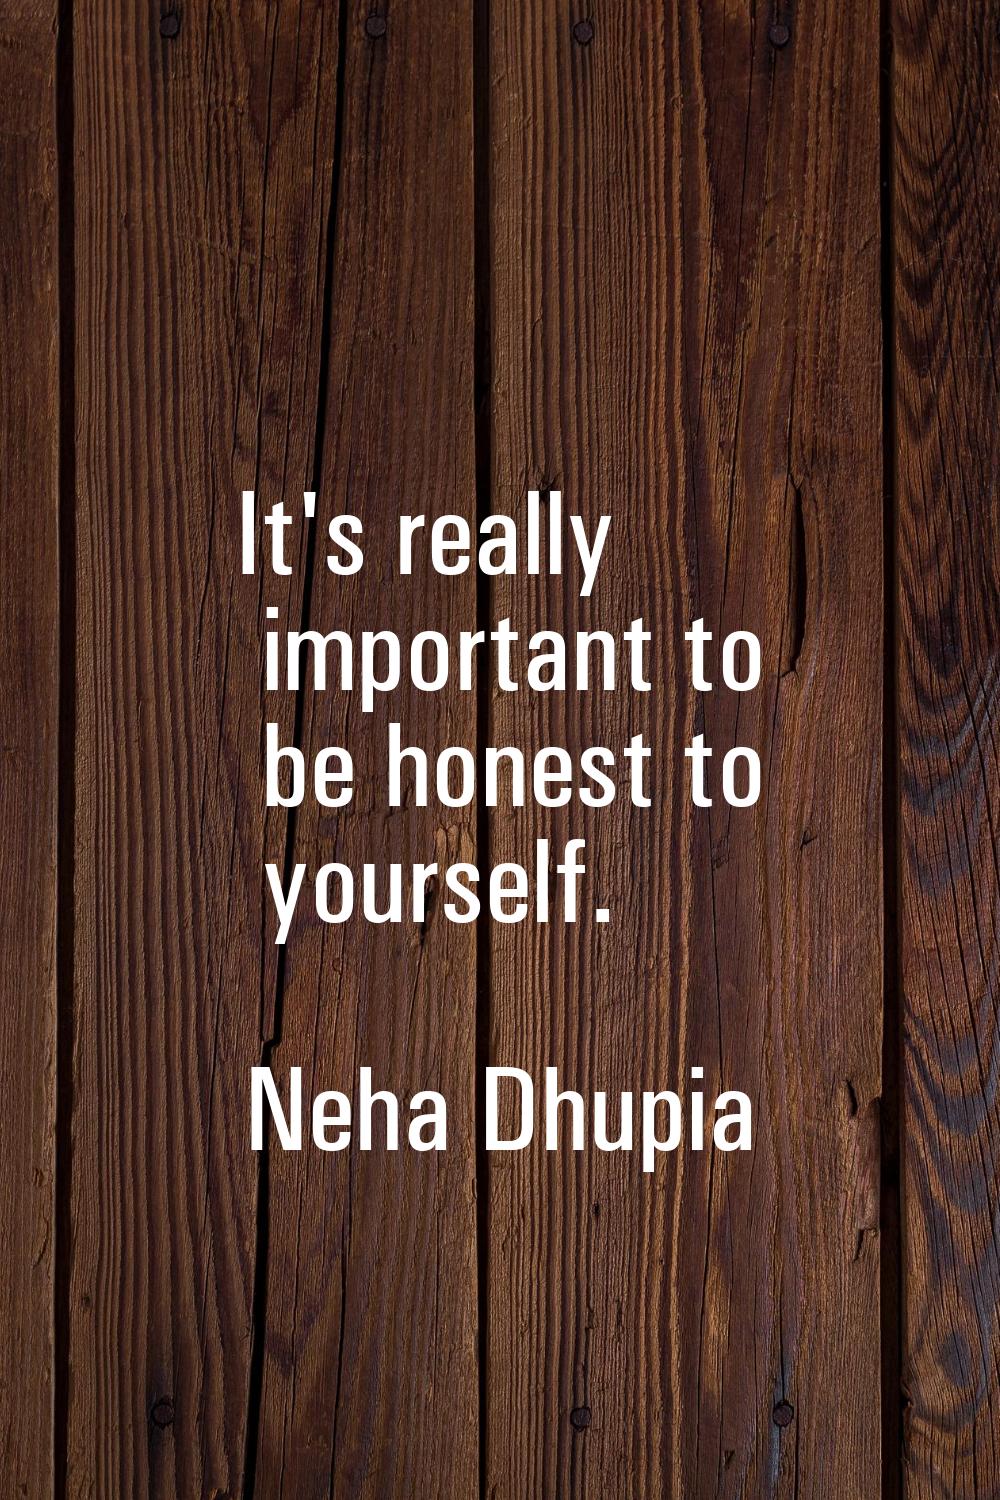 It's really important to be honest to yourself.